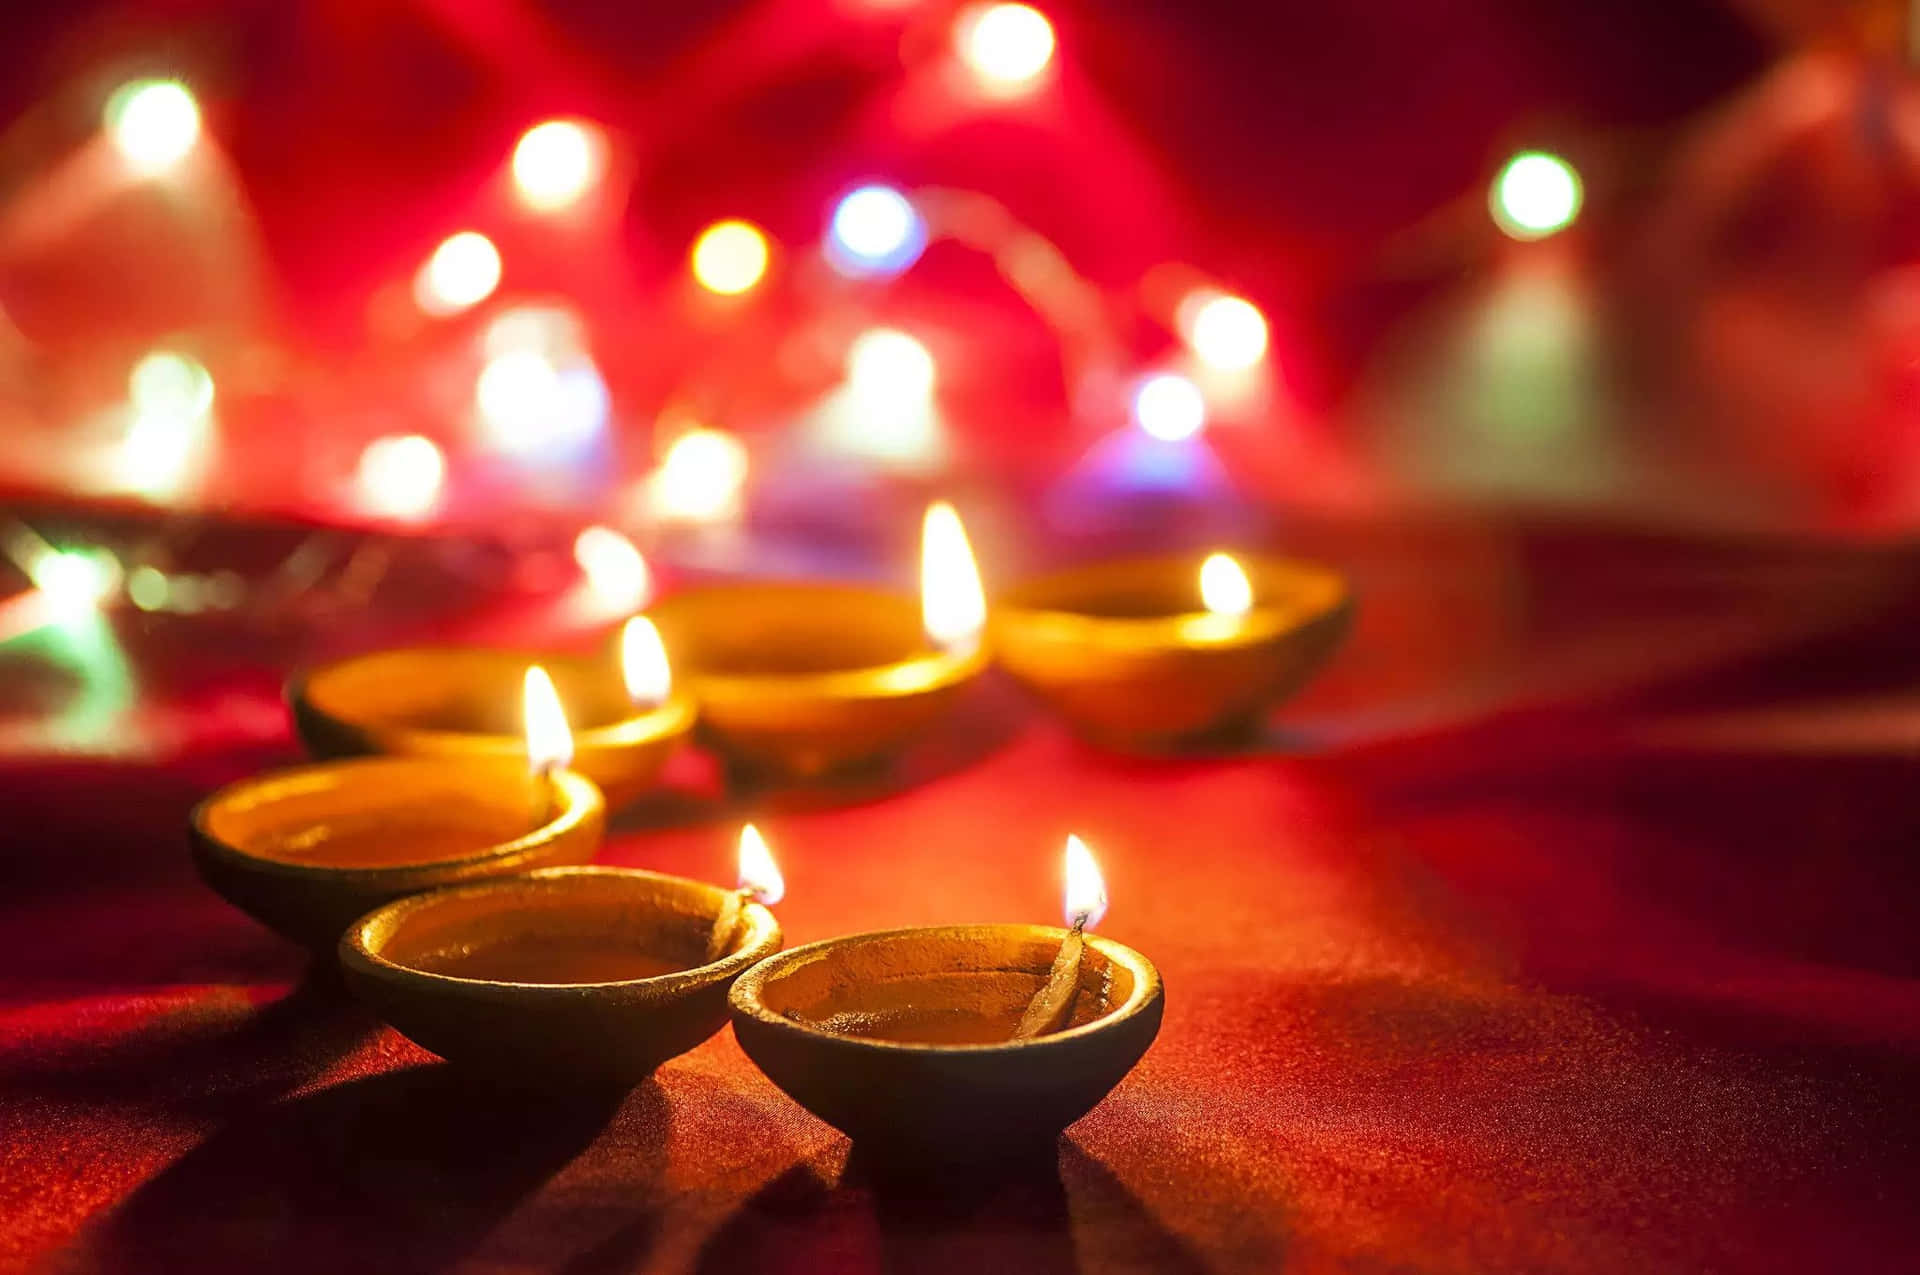 A Group Of Candles Lit Up On A Red Background